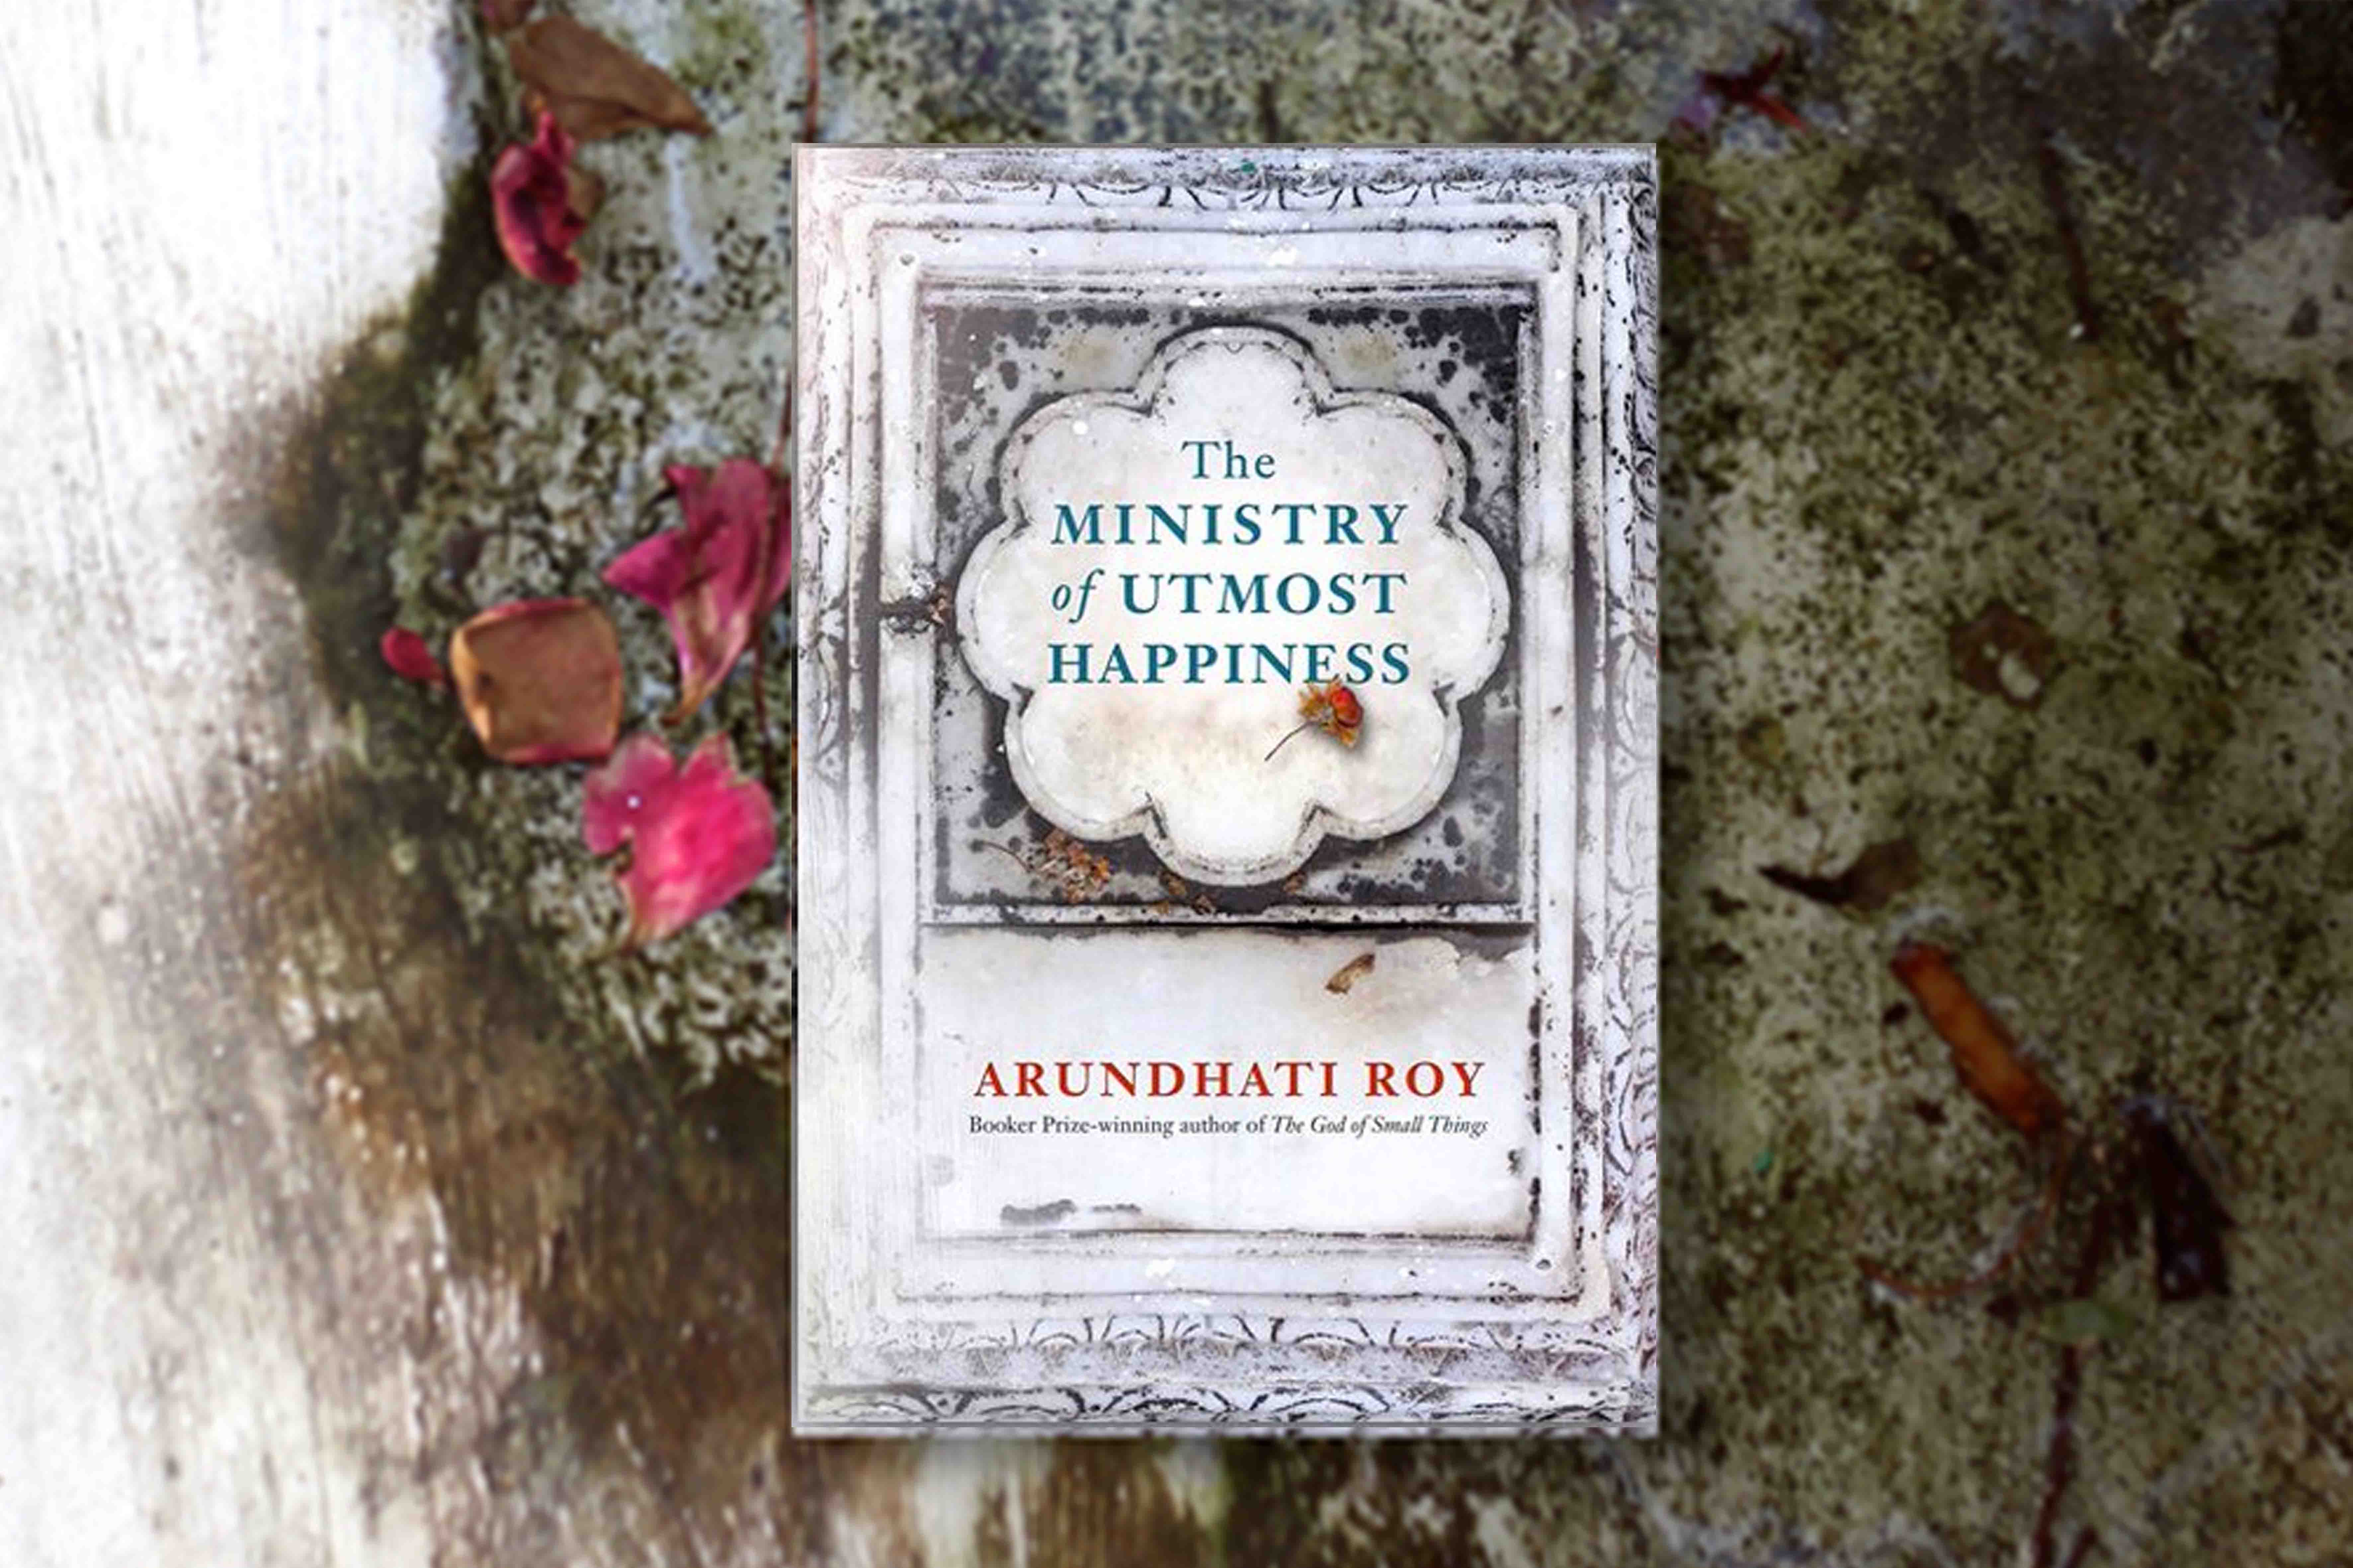 Arundhati Roy, The ministry of utmost happiness